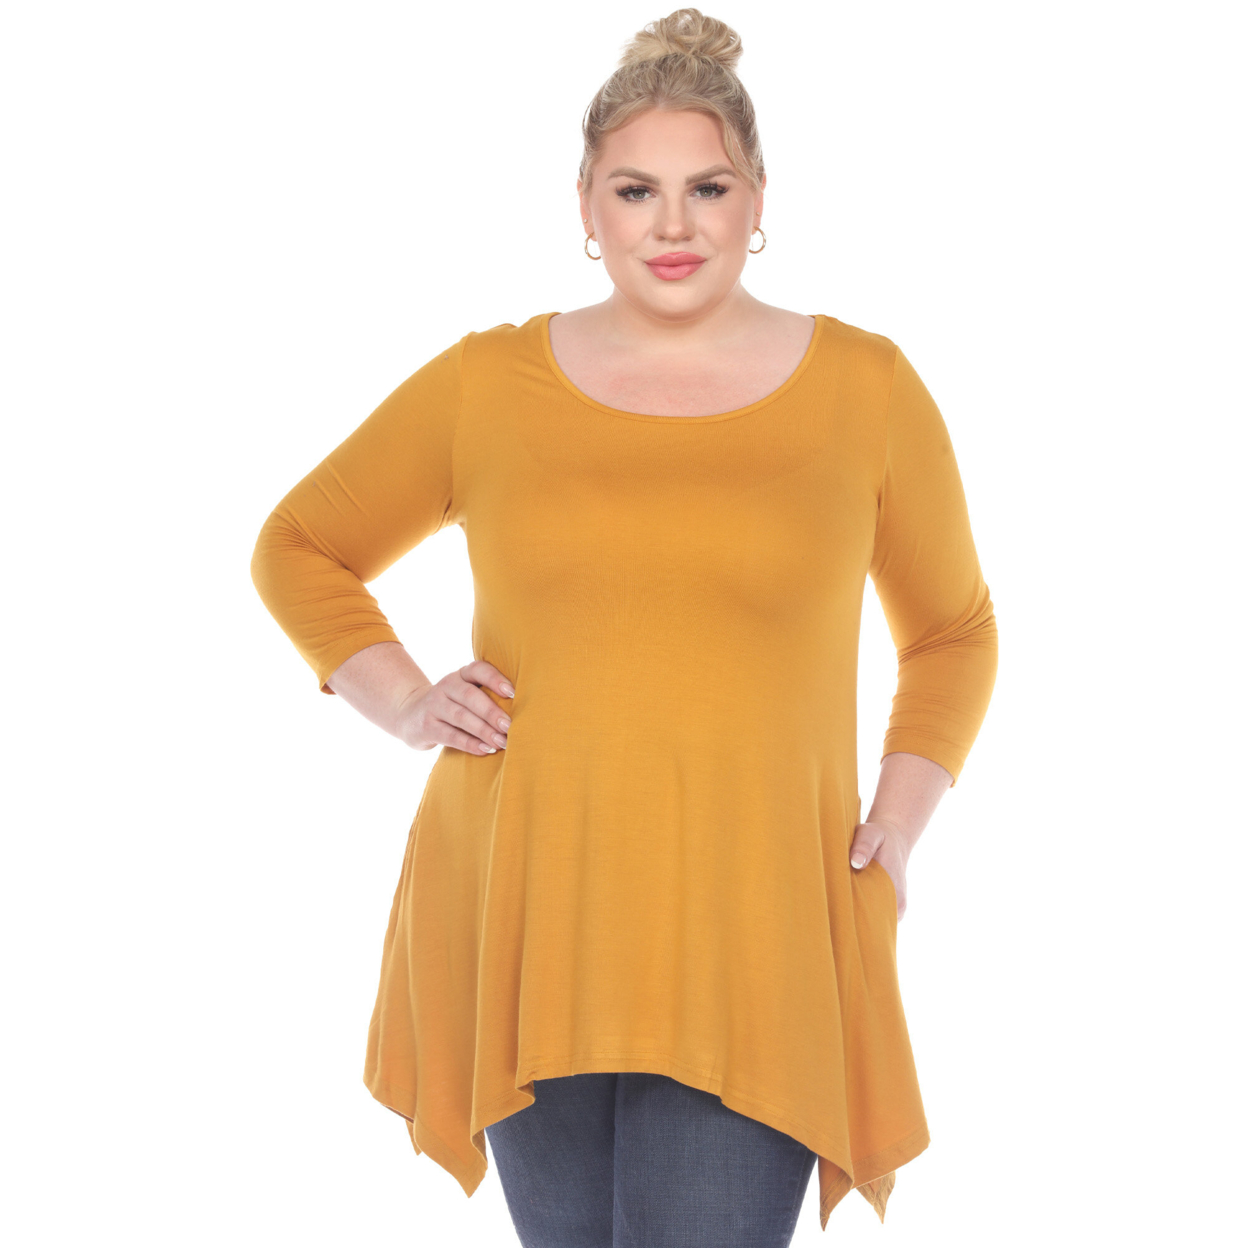 White Mark Women's Quarter Sleeve Tunic Top With Pockets - Mustard, Large